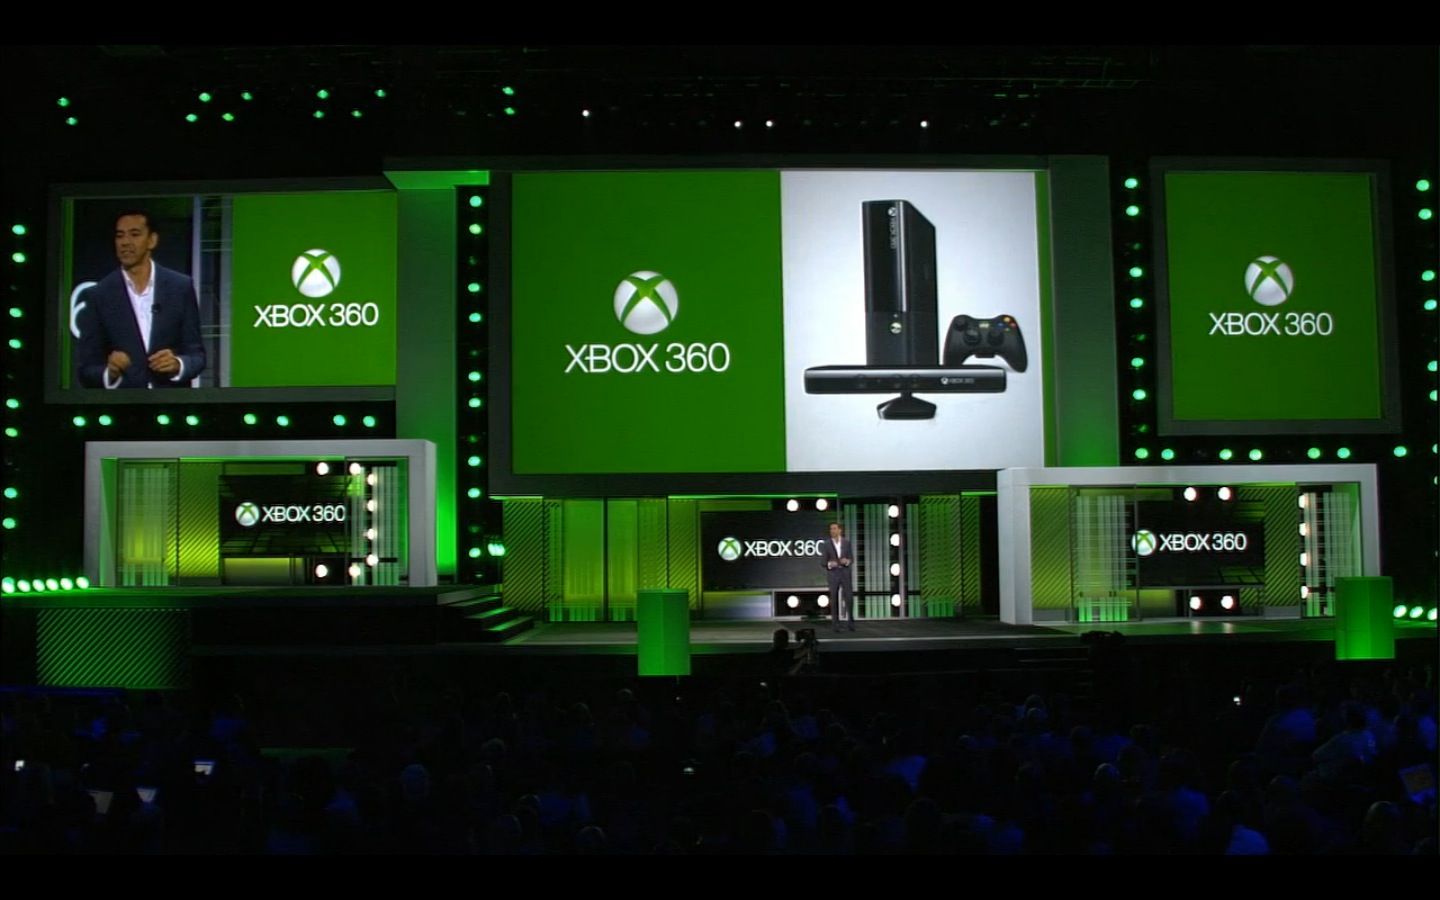 First up, the Xbox 360